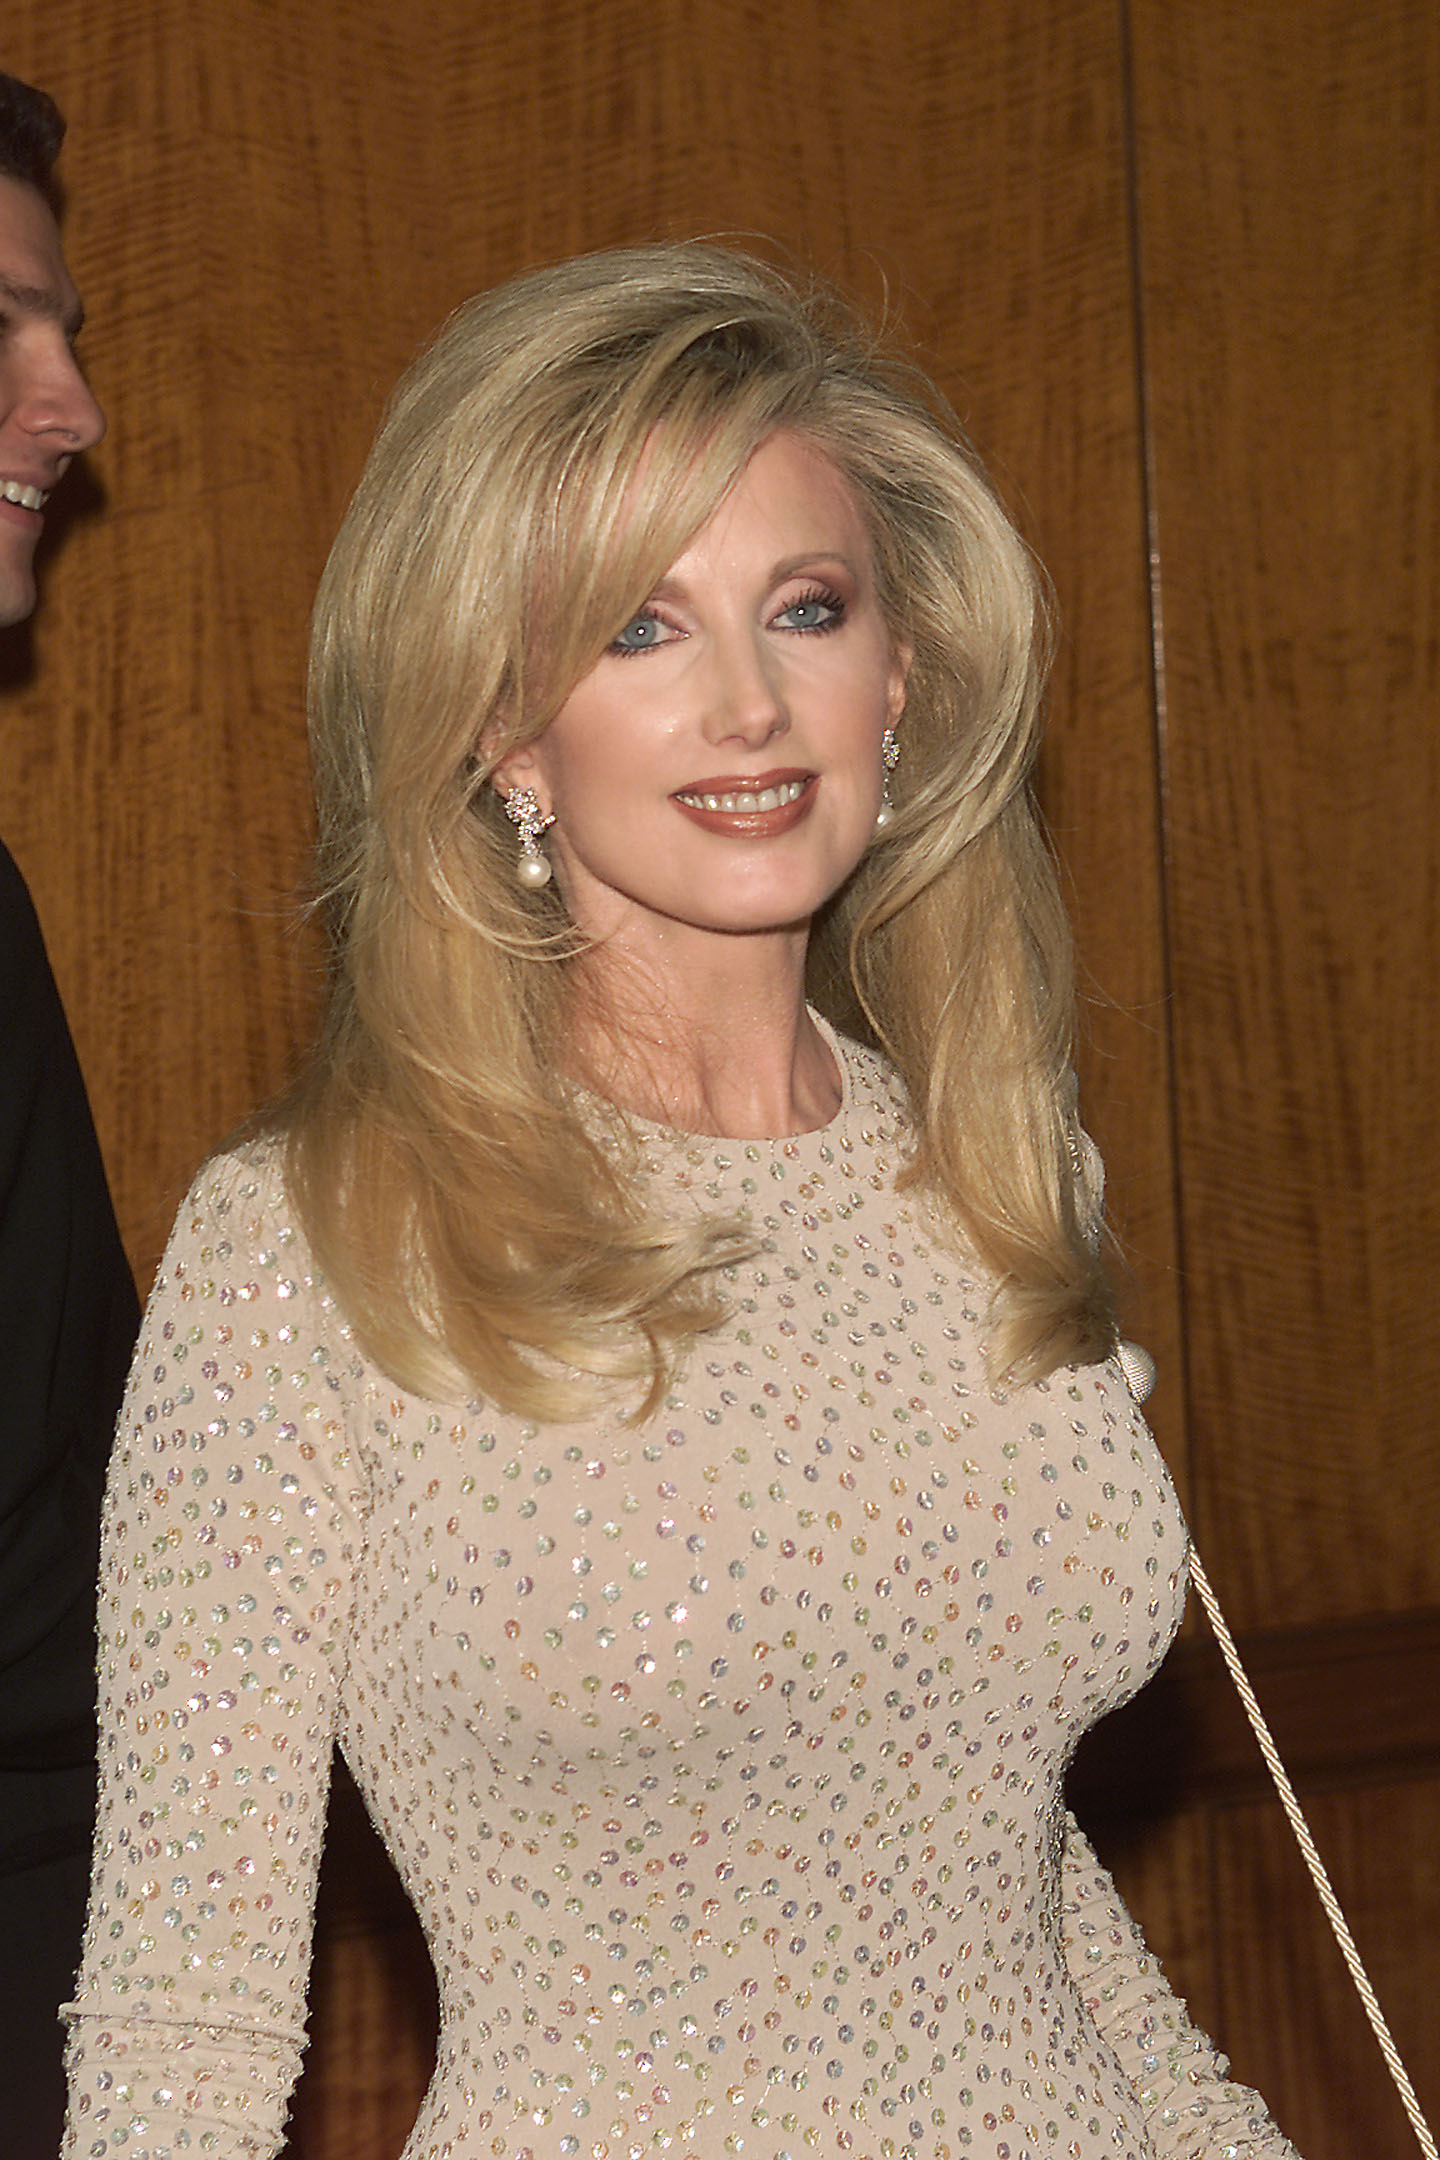 Morgan Fairchild at the 'The Michael Awards' in New York in 2008 | Source: Getty Images